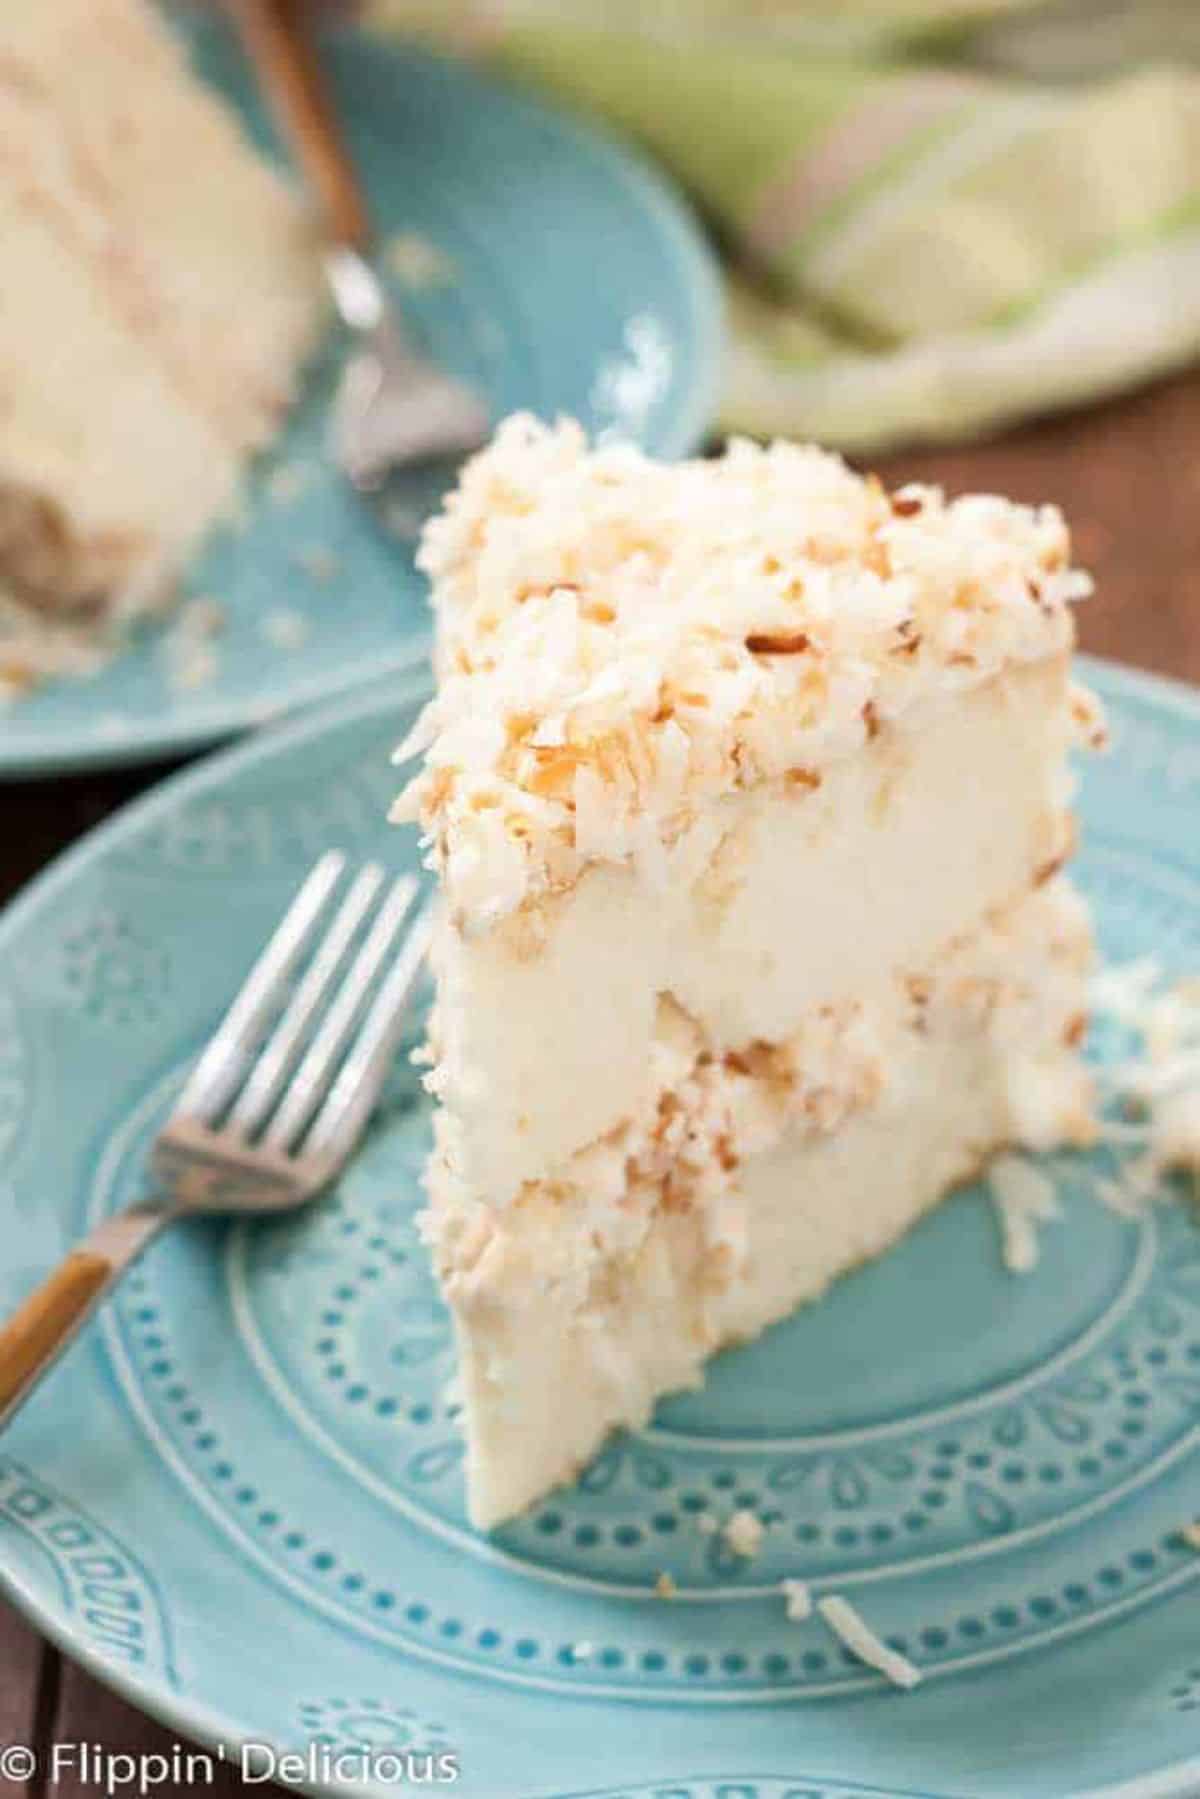 A piece of Dairy-Free Gluten-Free Coconut Cake on a blue plate with a fork.